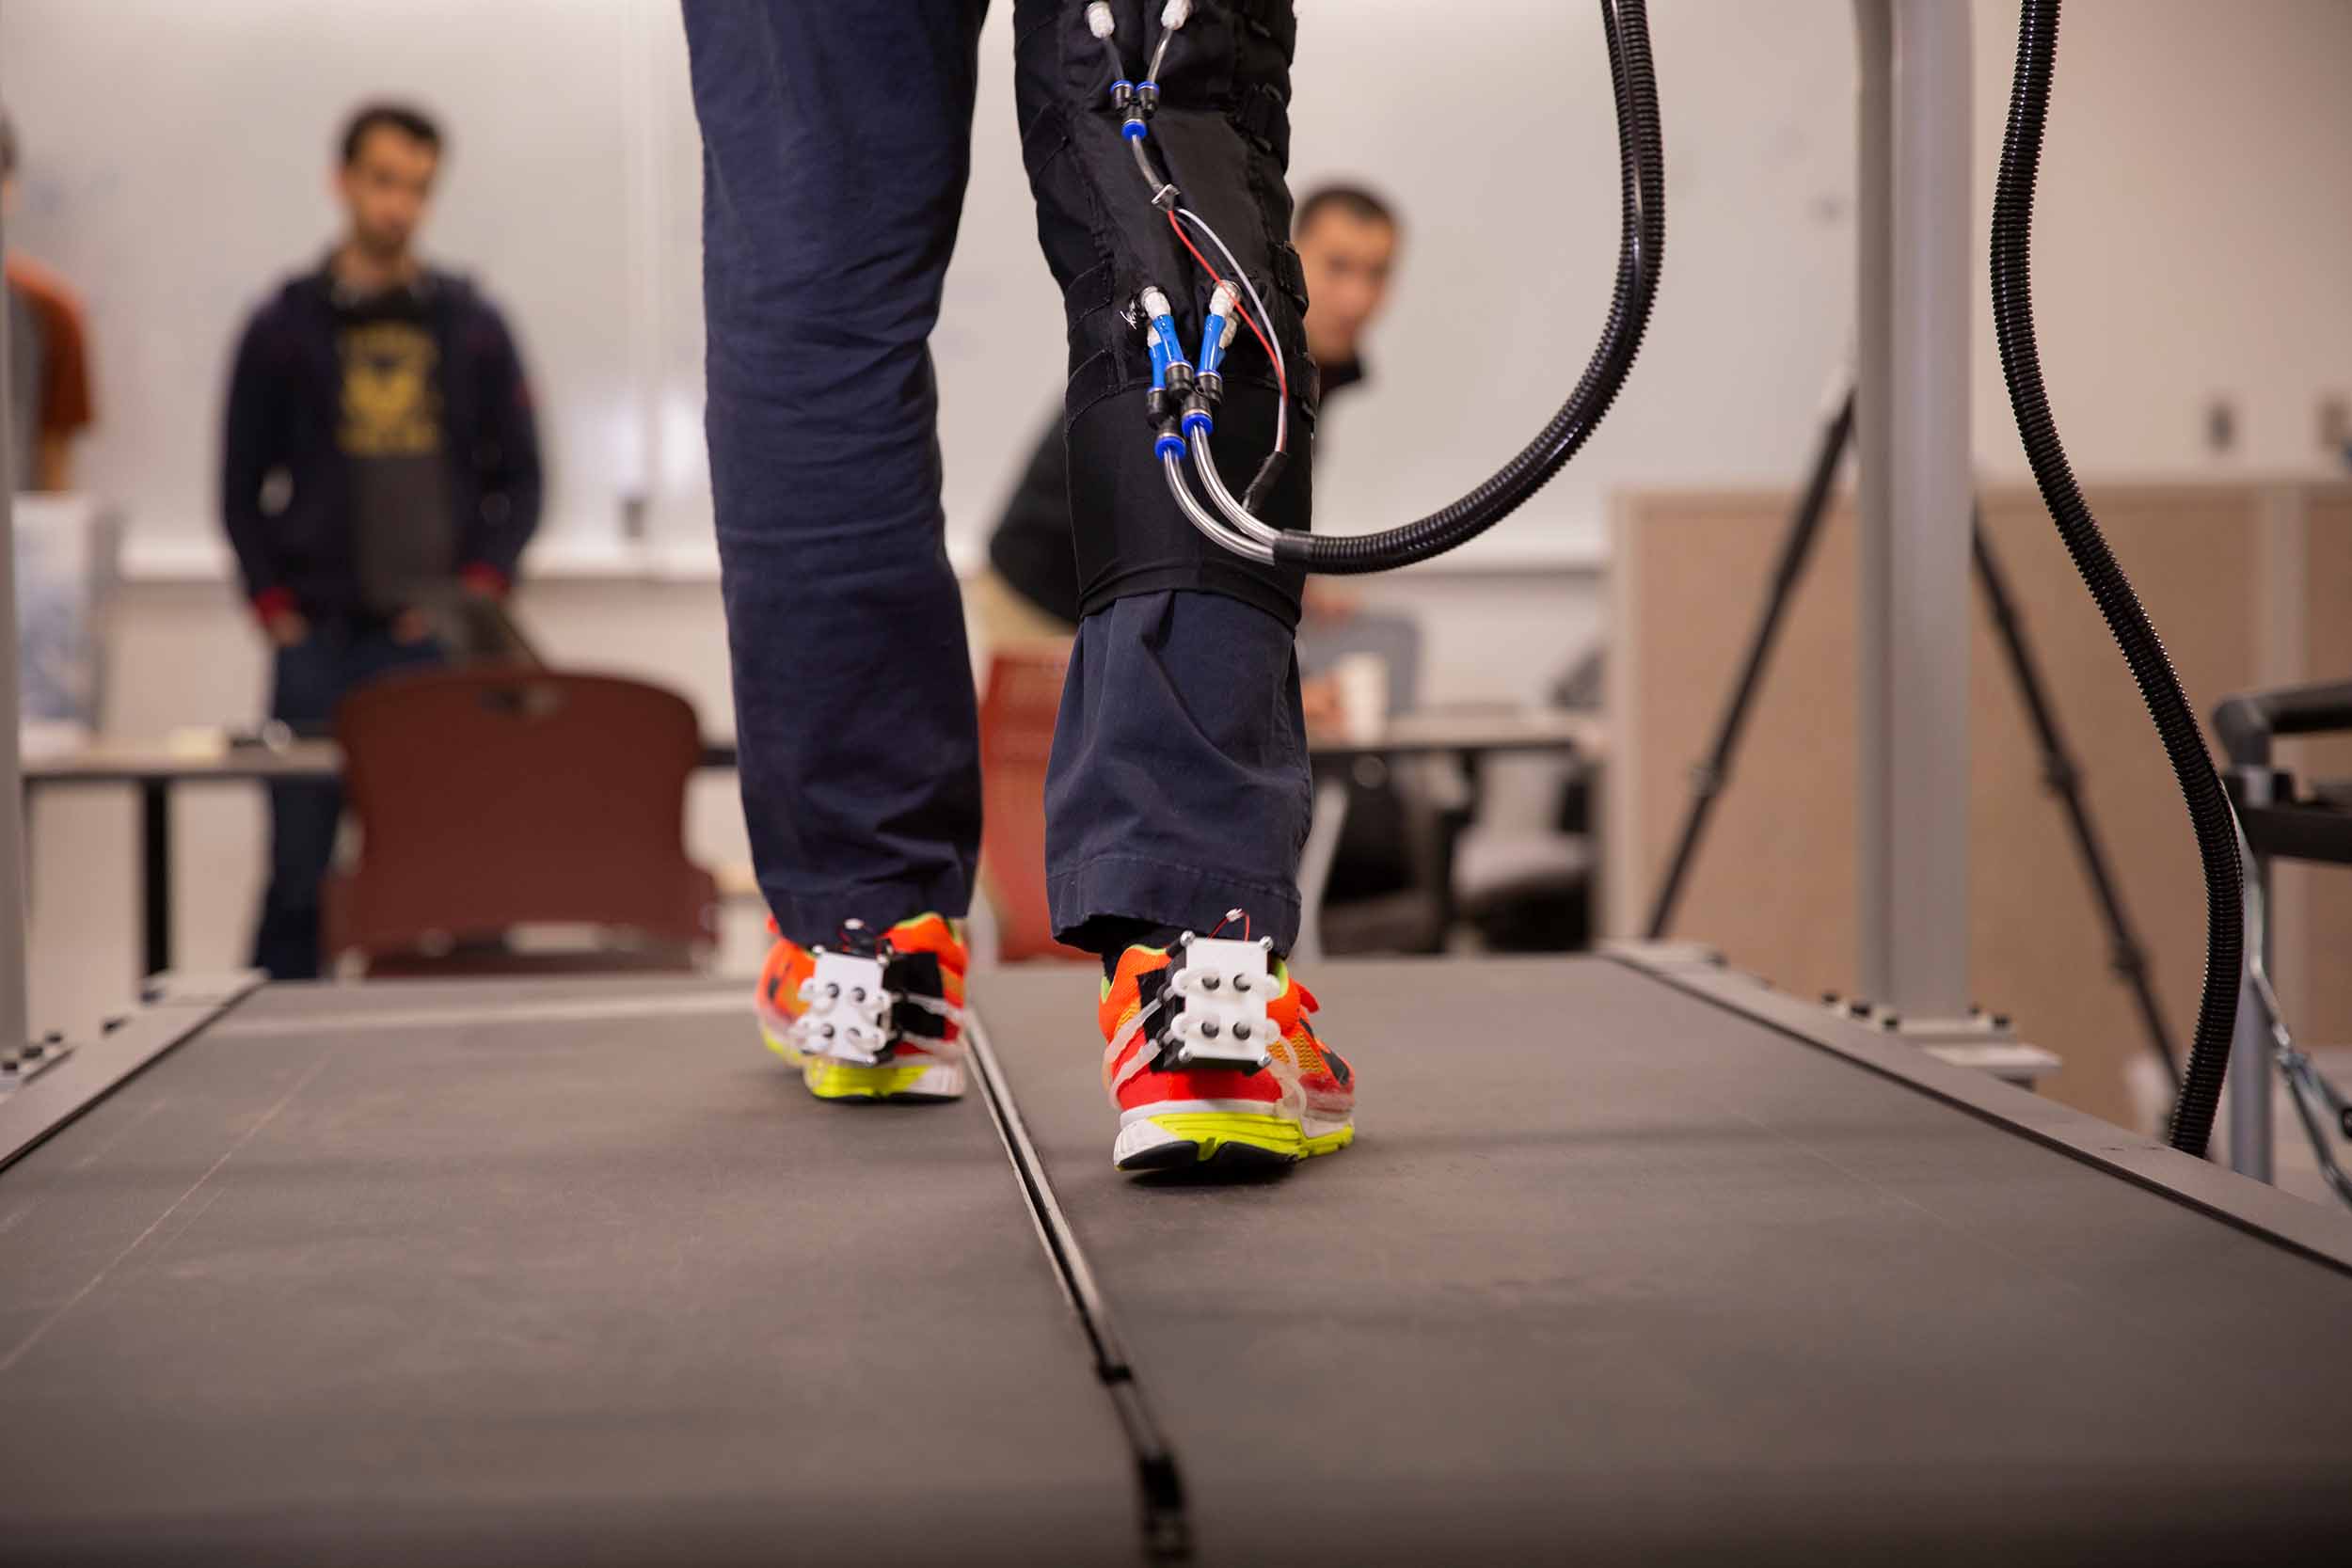 a person wearing robotic devices on their knee and both shoes walks on a treadmill while being observed by researchers